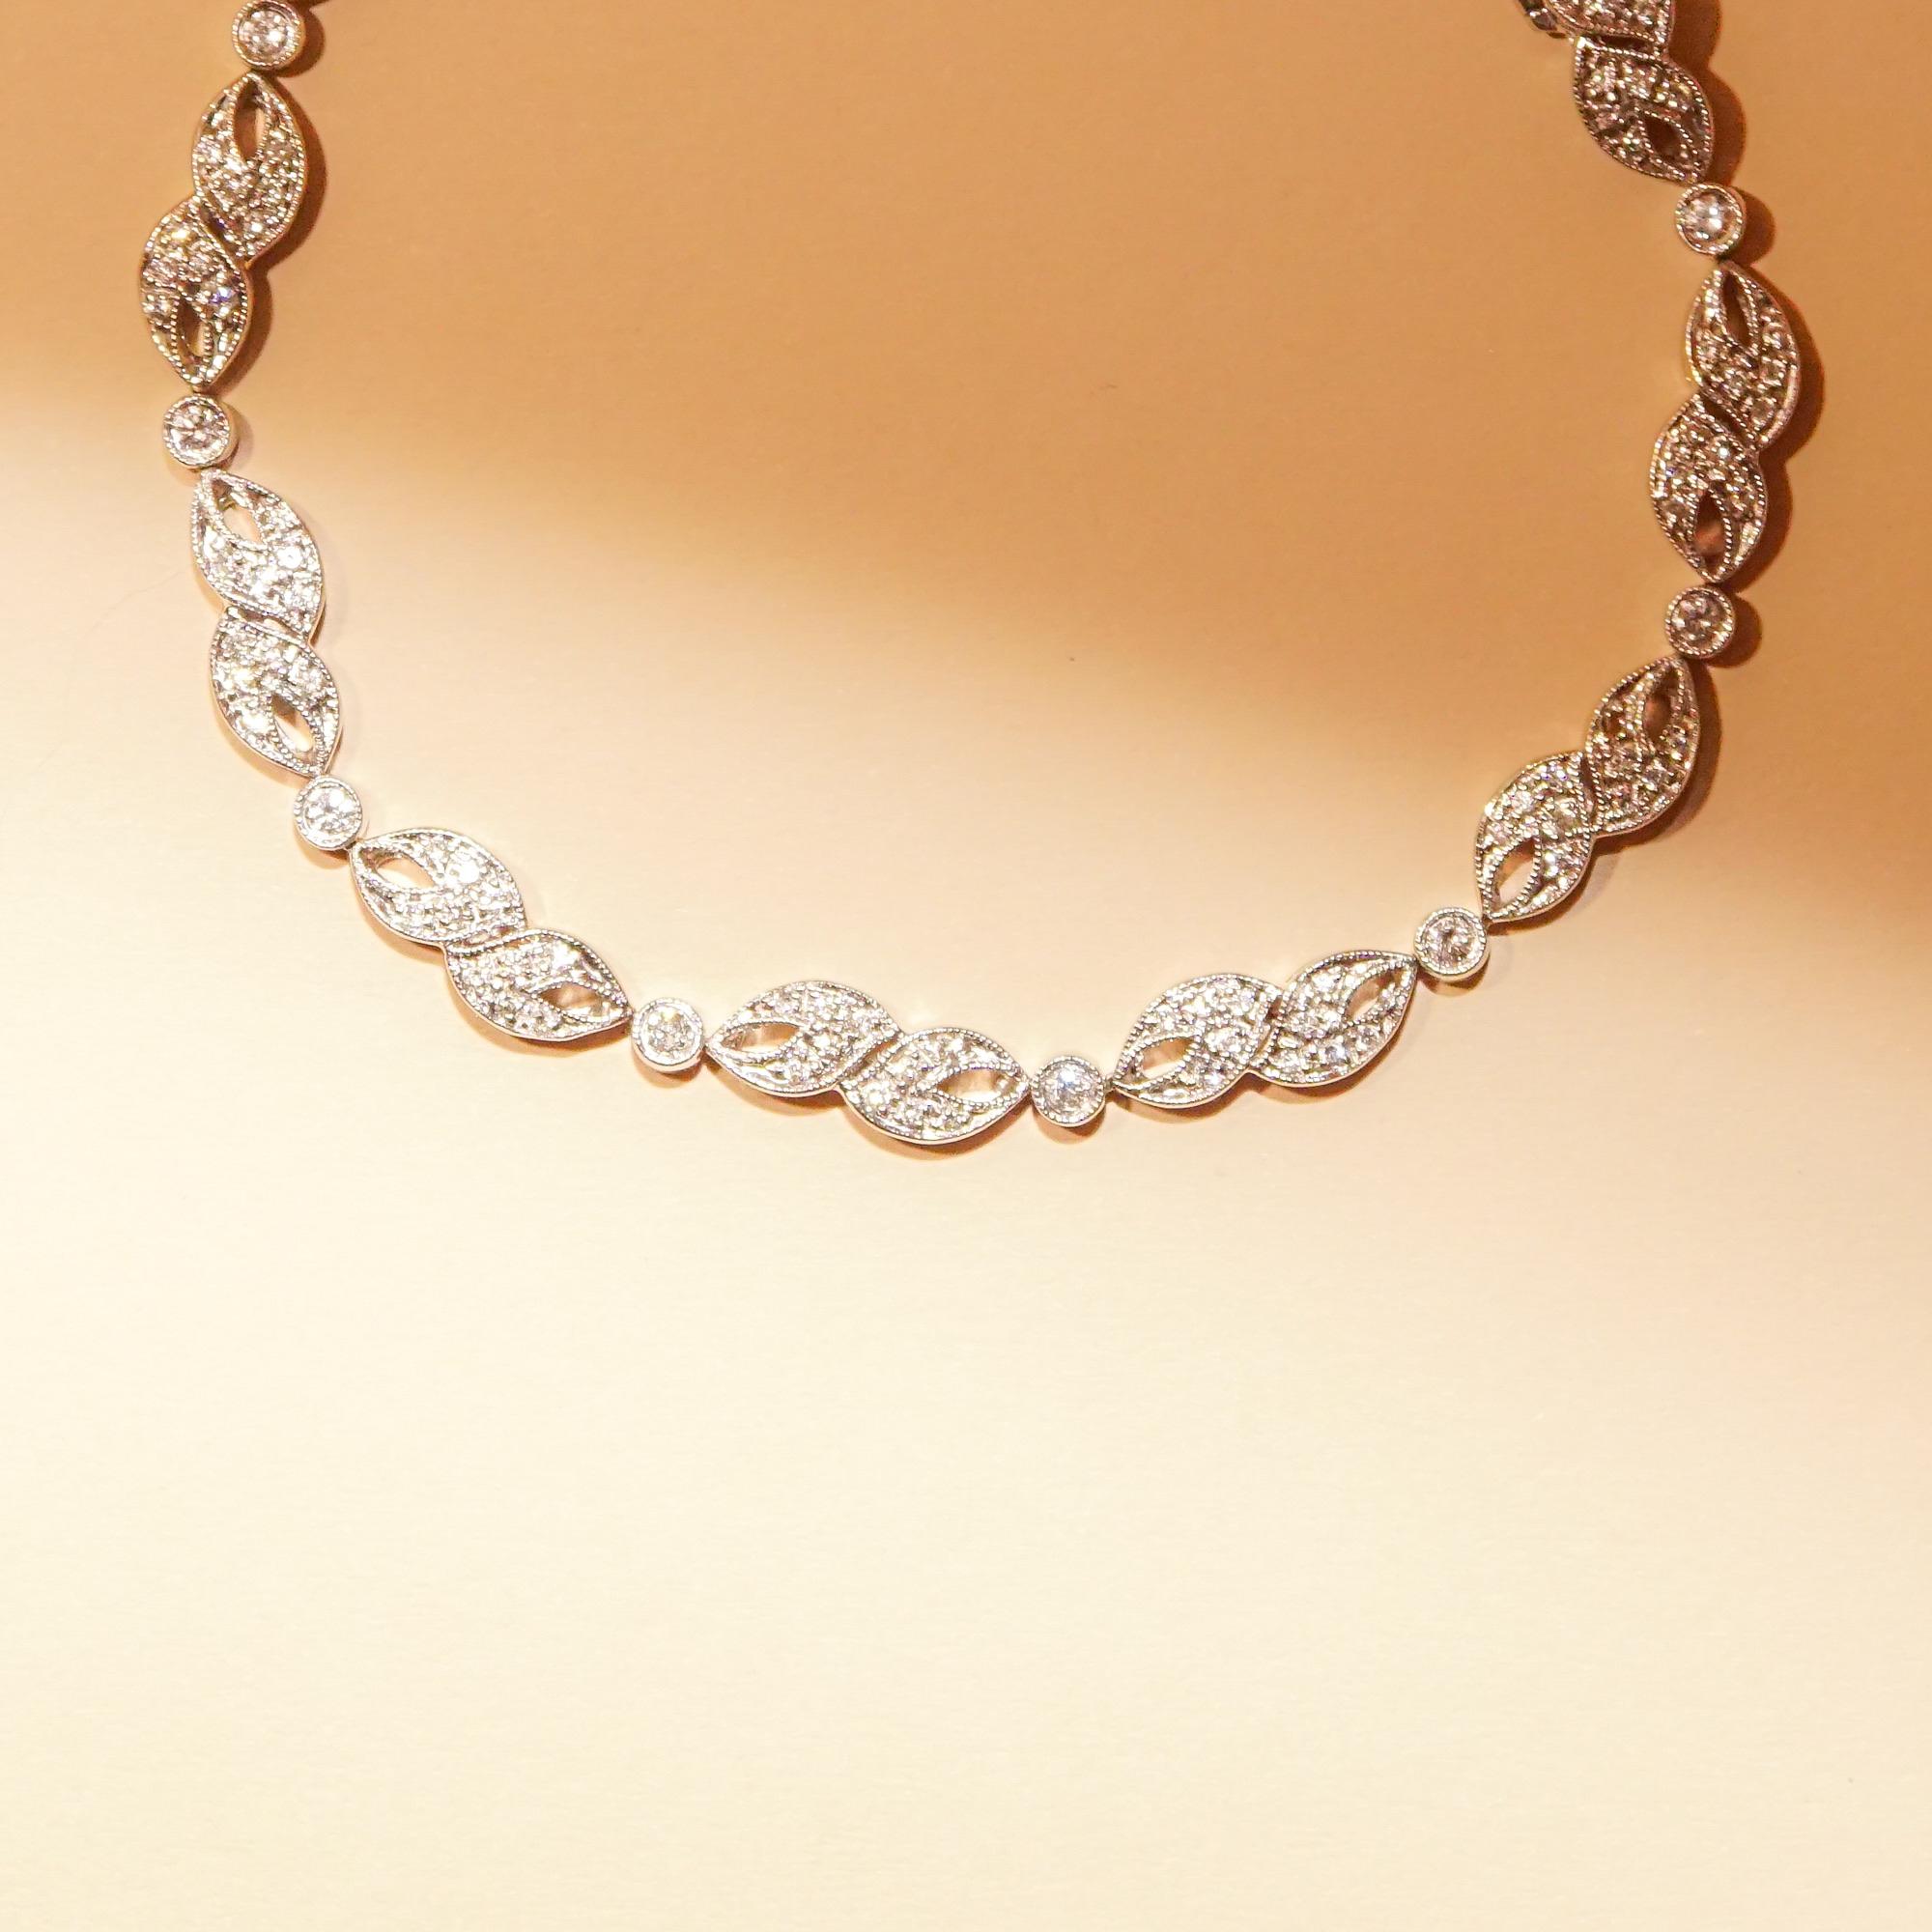 A sparkling 14k white gold diamond link bracelet boasting over 100 dazzling diamonds. Features an articulated single strand of alternating links, 11 larger fancy links and 11 smaller round bezel links each set with its own .03T brilliant diamond